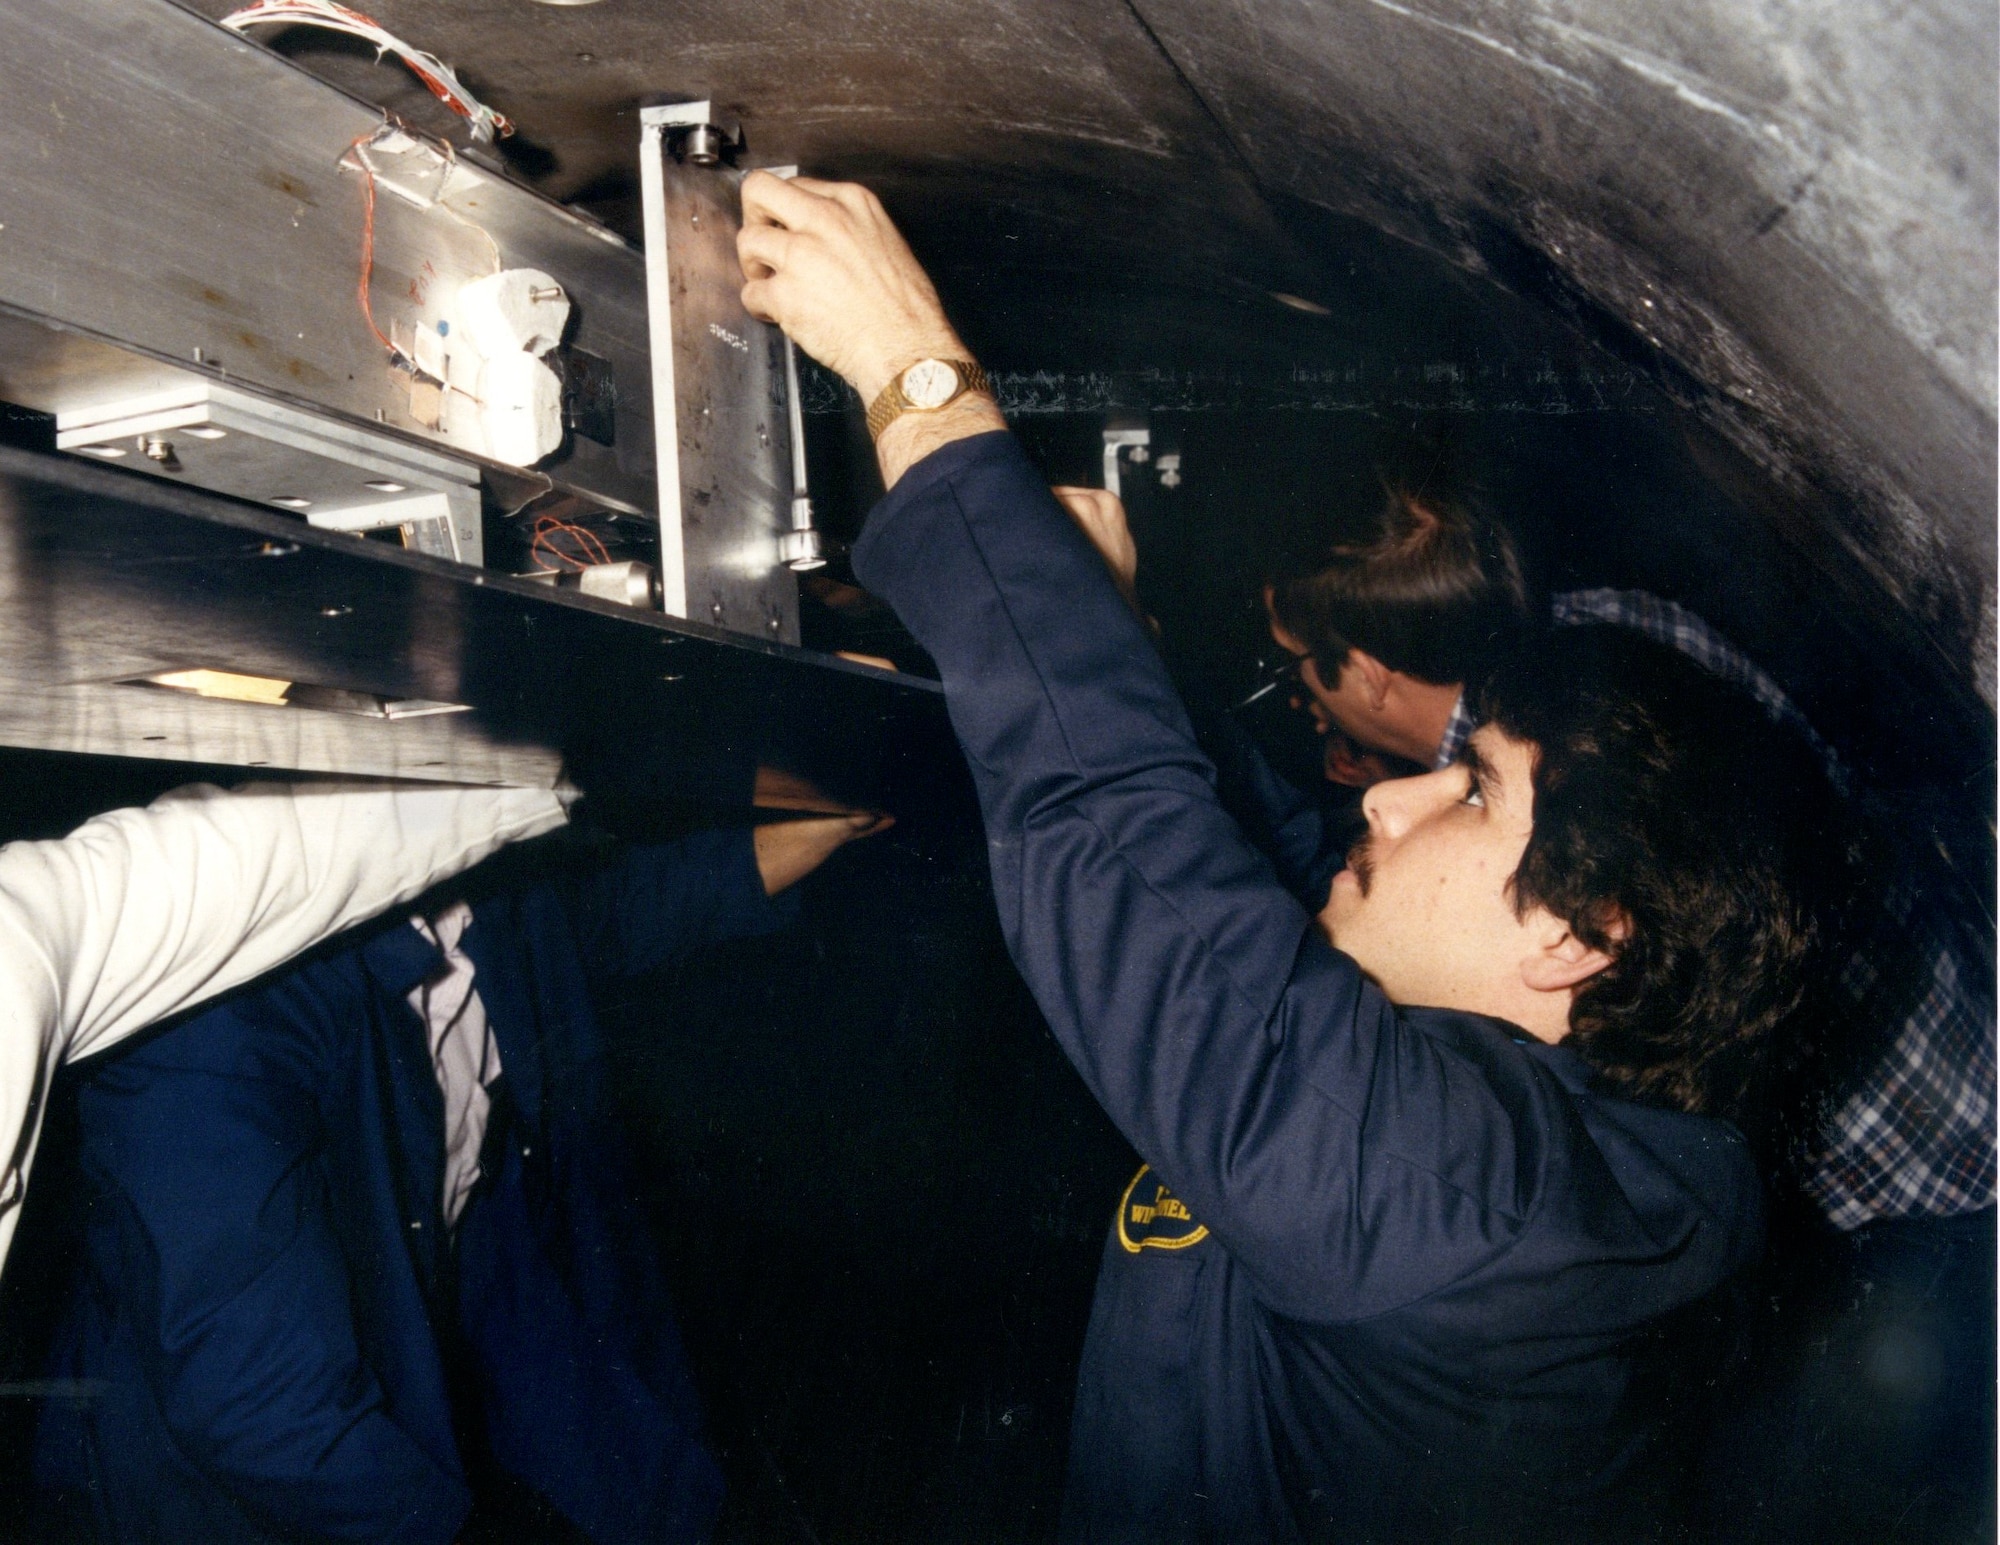 : Dan Marren, front, works as part of a test team on the first aero-optical experiment in the Hypervelocity Wind Tunnel 9, then operated by the Naval Surface Warfare Center, in support of the Strategic Defense Initiative Program in 1984. The innovative test measured precise optical aberrations of target signals presented to interceptor seekers travelling at Mach 10 which enabled the realization of ballistic missile defensive test capabilities used worldwide. Hypervelocity Wind Tunnel 9, located at the Federal Research Center in White Oak, Maryland, is now operated by AEDC. Marren, who is the director of the AEDC White Oak site was recently selected to receive the 2017 American Institute of Aeronautics and Astronautics Ground Testing Technical Committee’s Ground Testing Award. (U.S. Navy photo) 